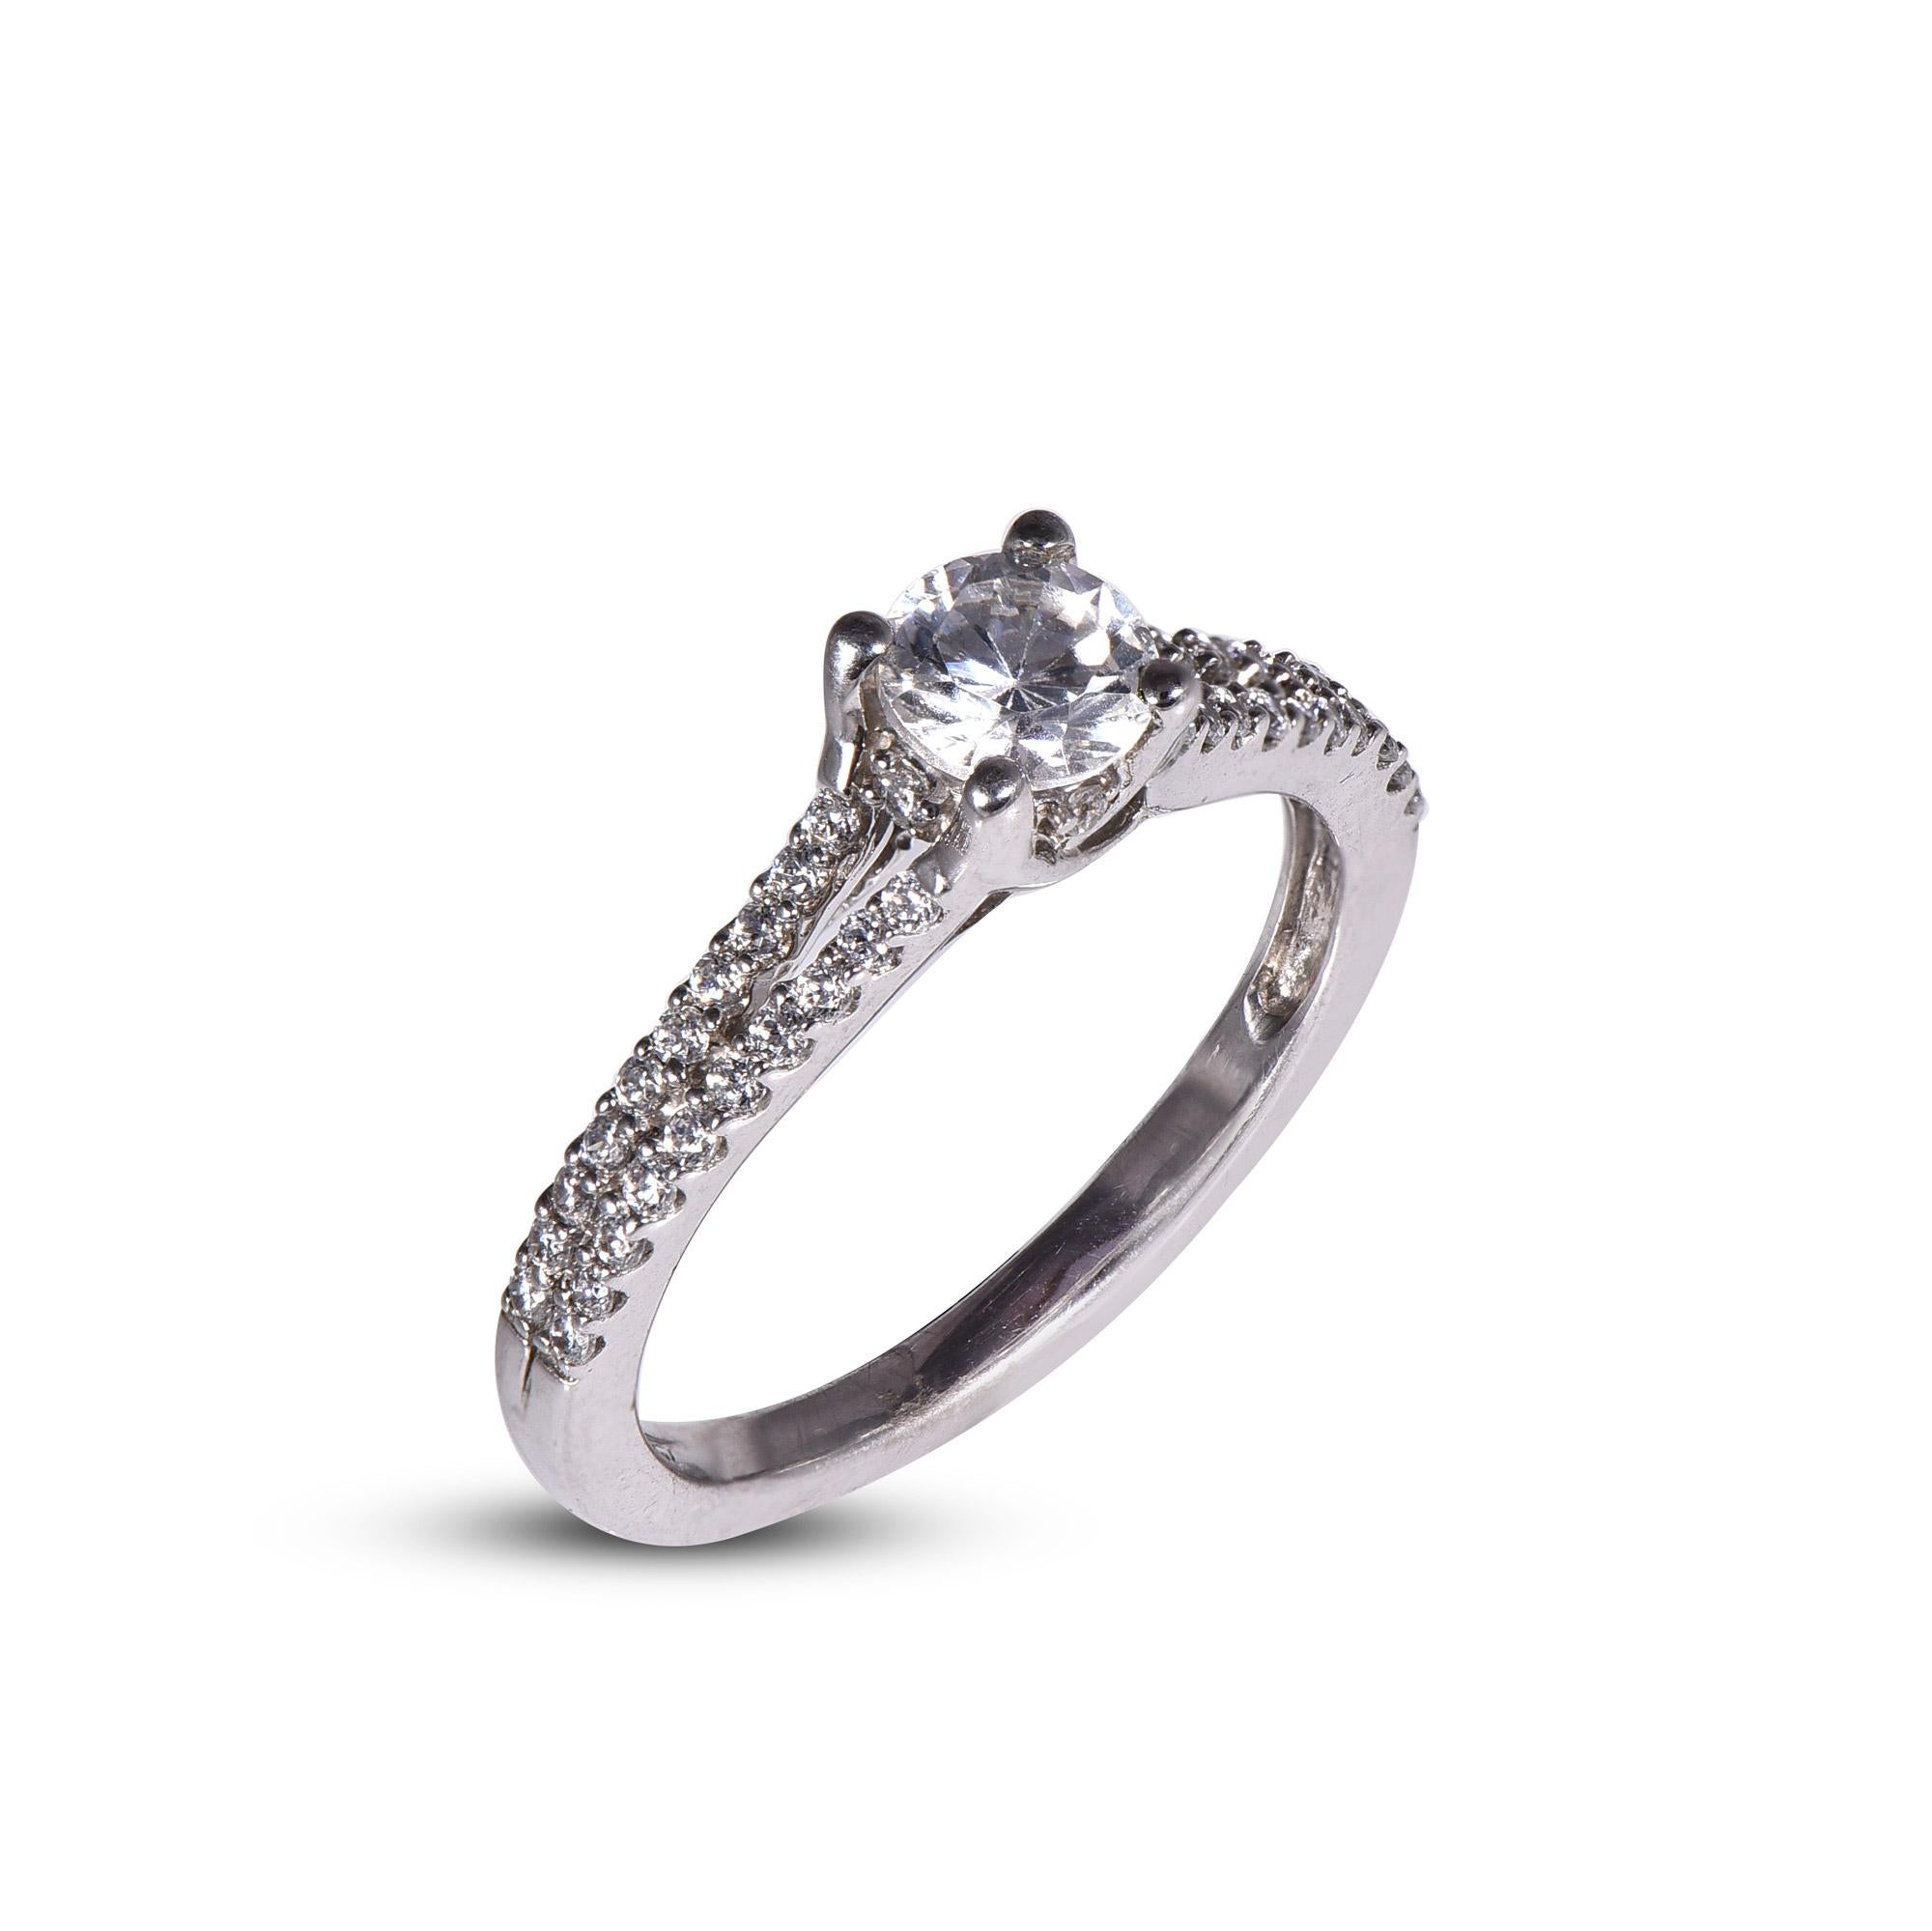 With one look of this Beautiful Round Split Shank Diamond Engagement Ring crafted in 18 kt white gold. This ring is beautifully designed and studded with 0.50 ct centre stone and 0.25 ct brilliant cut diamonds on split shank in prong setting. We